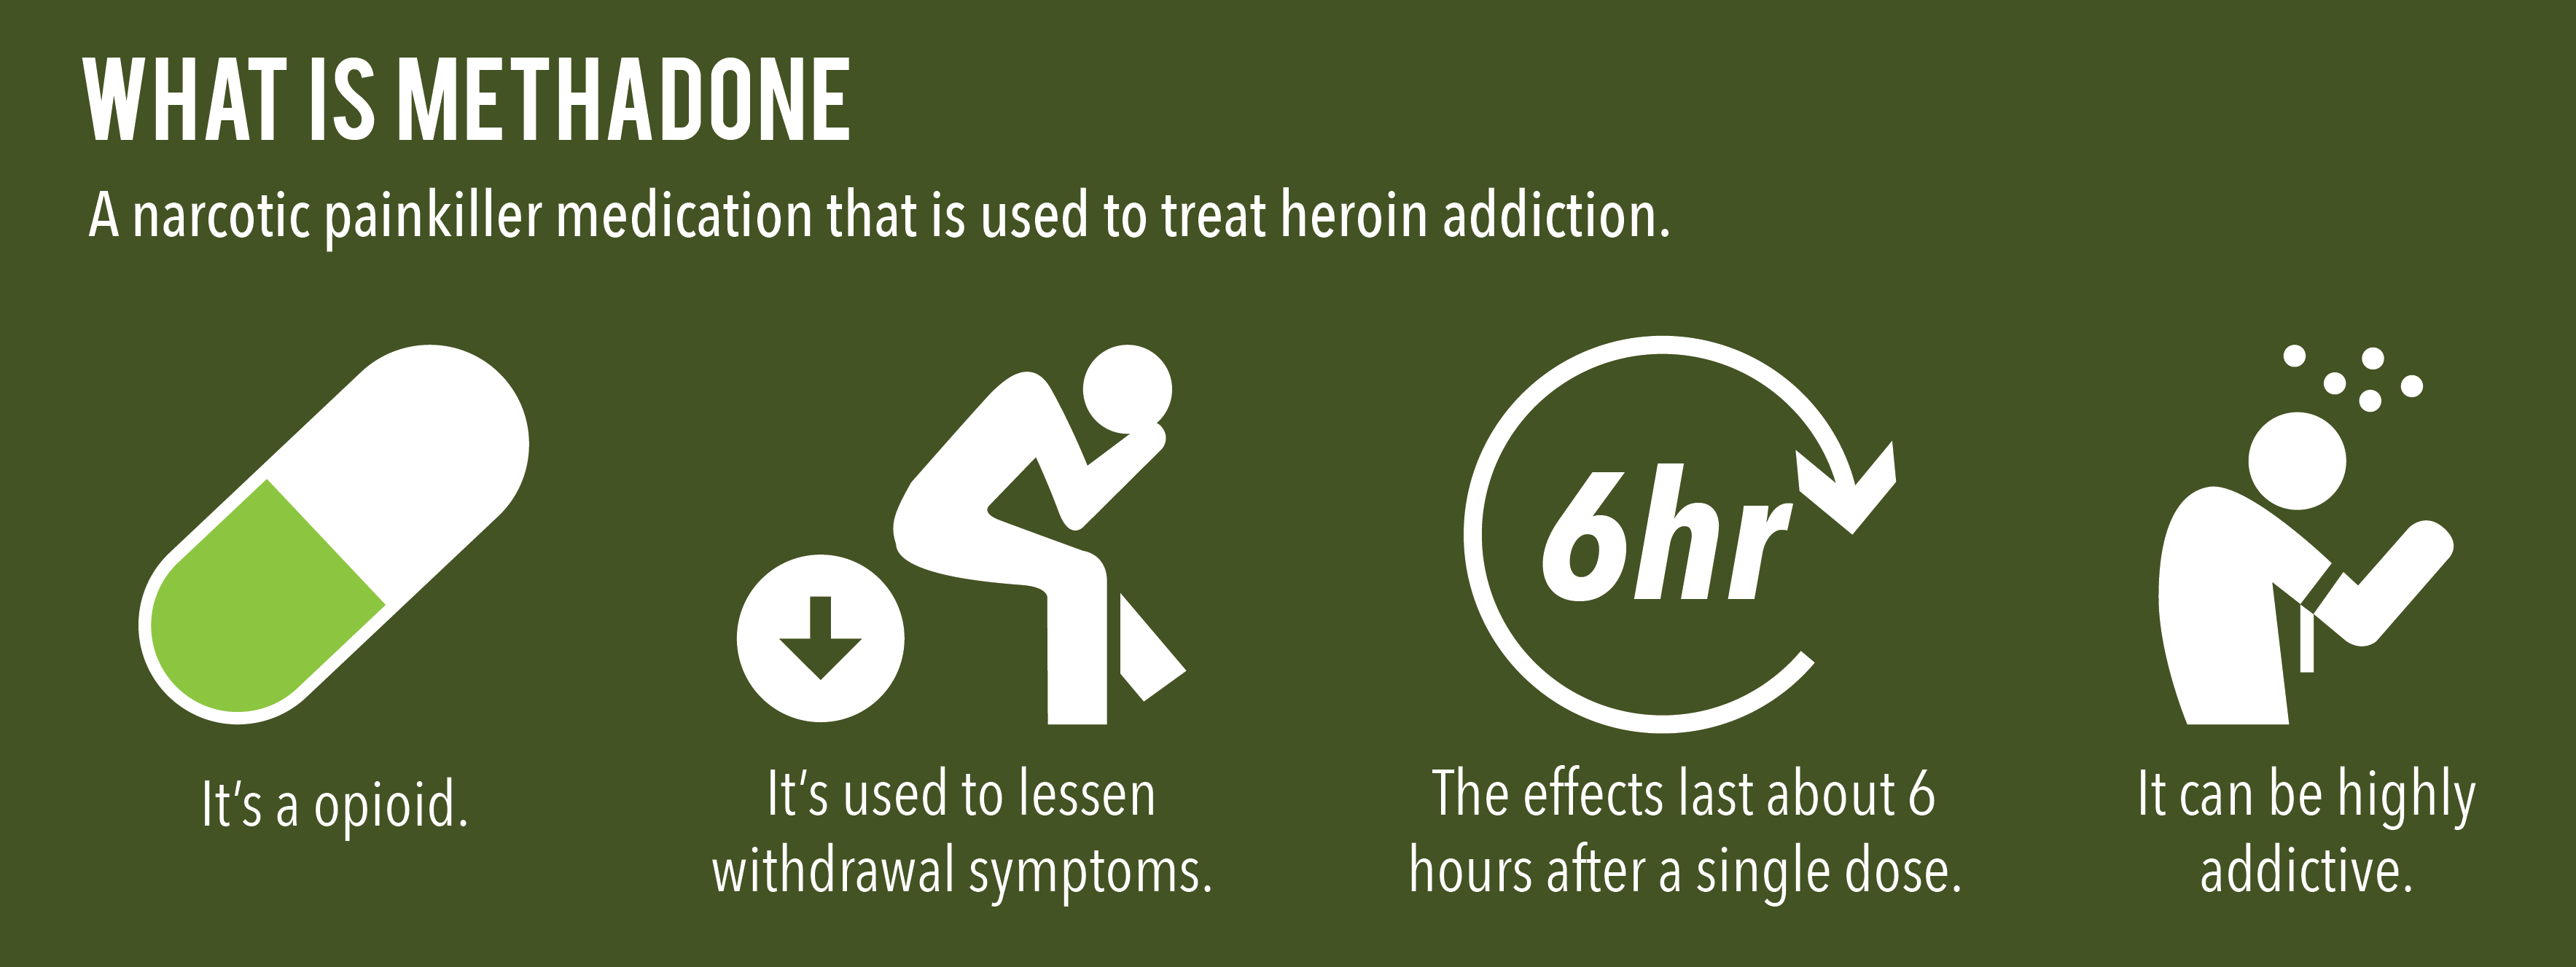 Methadone is a narcotic painkiller medication that is used to treat heroin addiction, it is a opioid, it is used to lessen withdrawal symptoms, the effects last about 6 hours after a single dose and it can be highly addictive